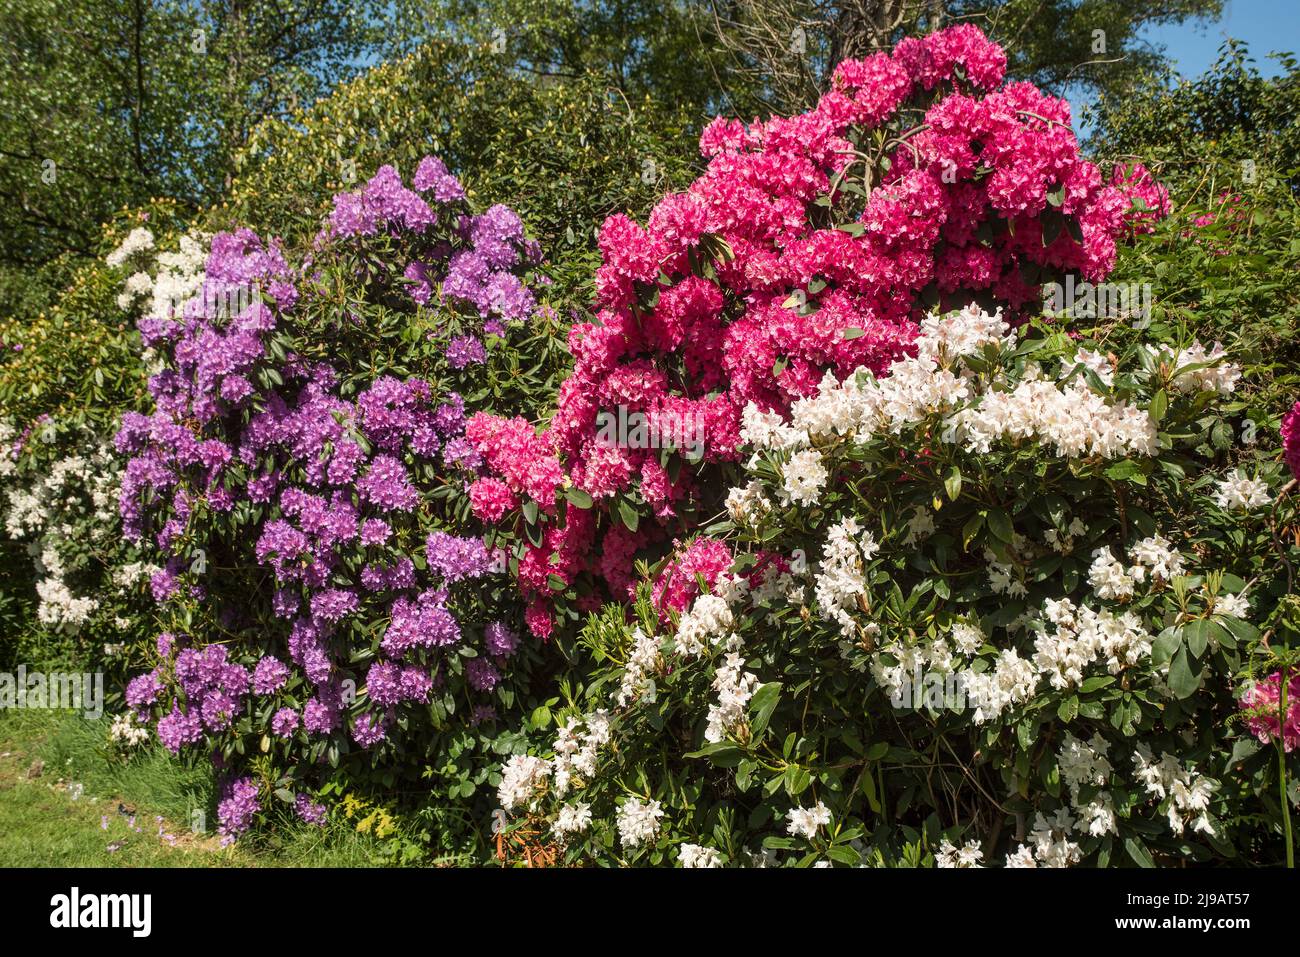 Bright pink, purple and white rhododendron flowers in Summer with a blue sky. Stock Photo